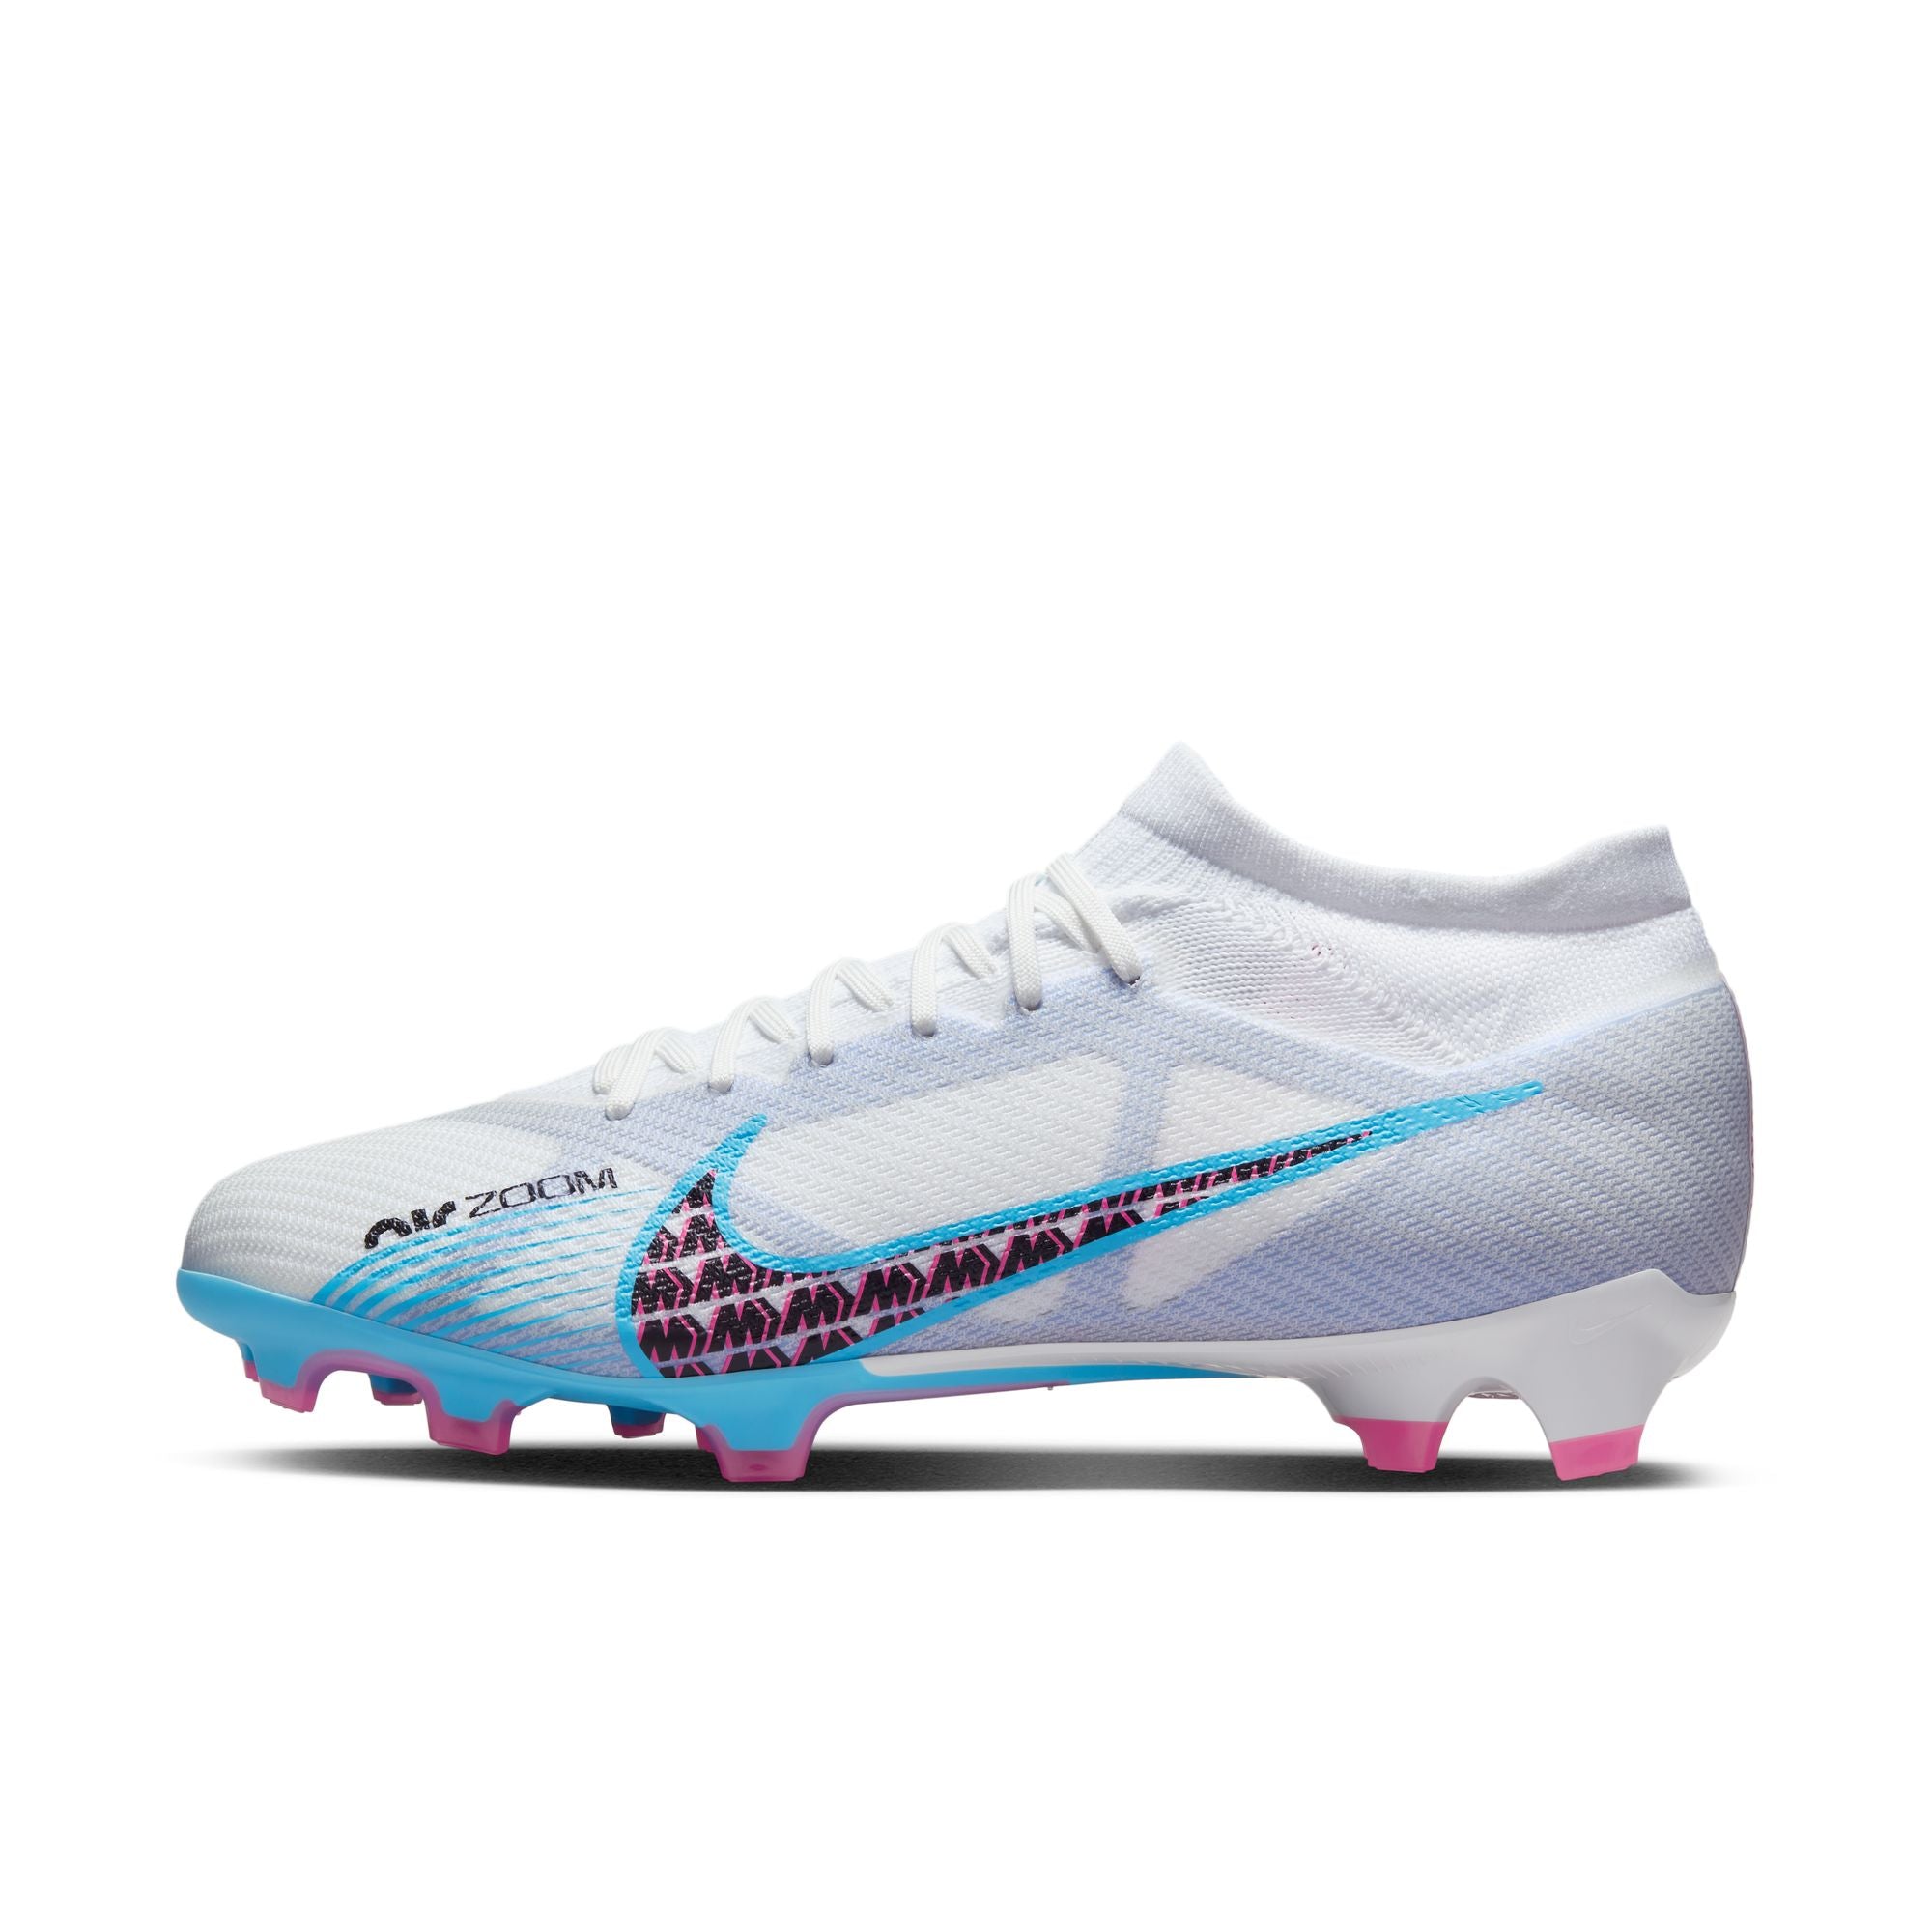 Nike Mercurial 15 Pro FG Firm-Ground Soccer Cleats